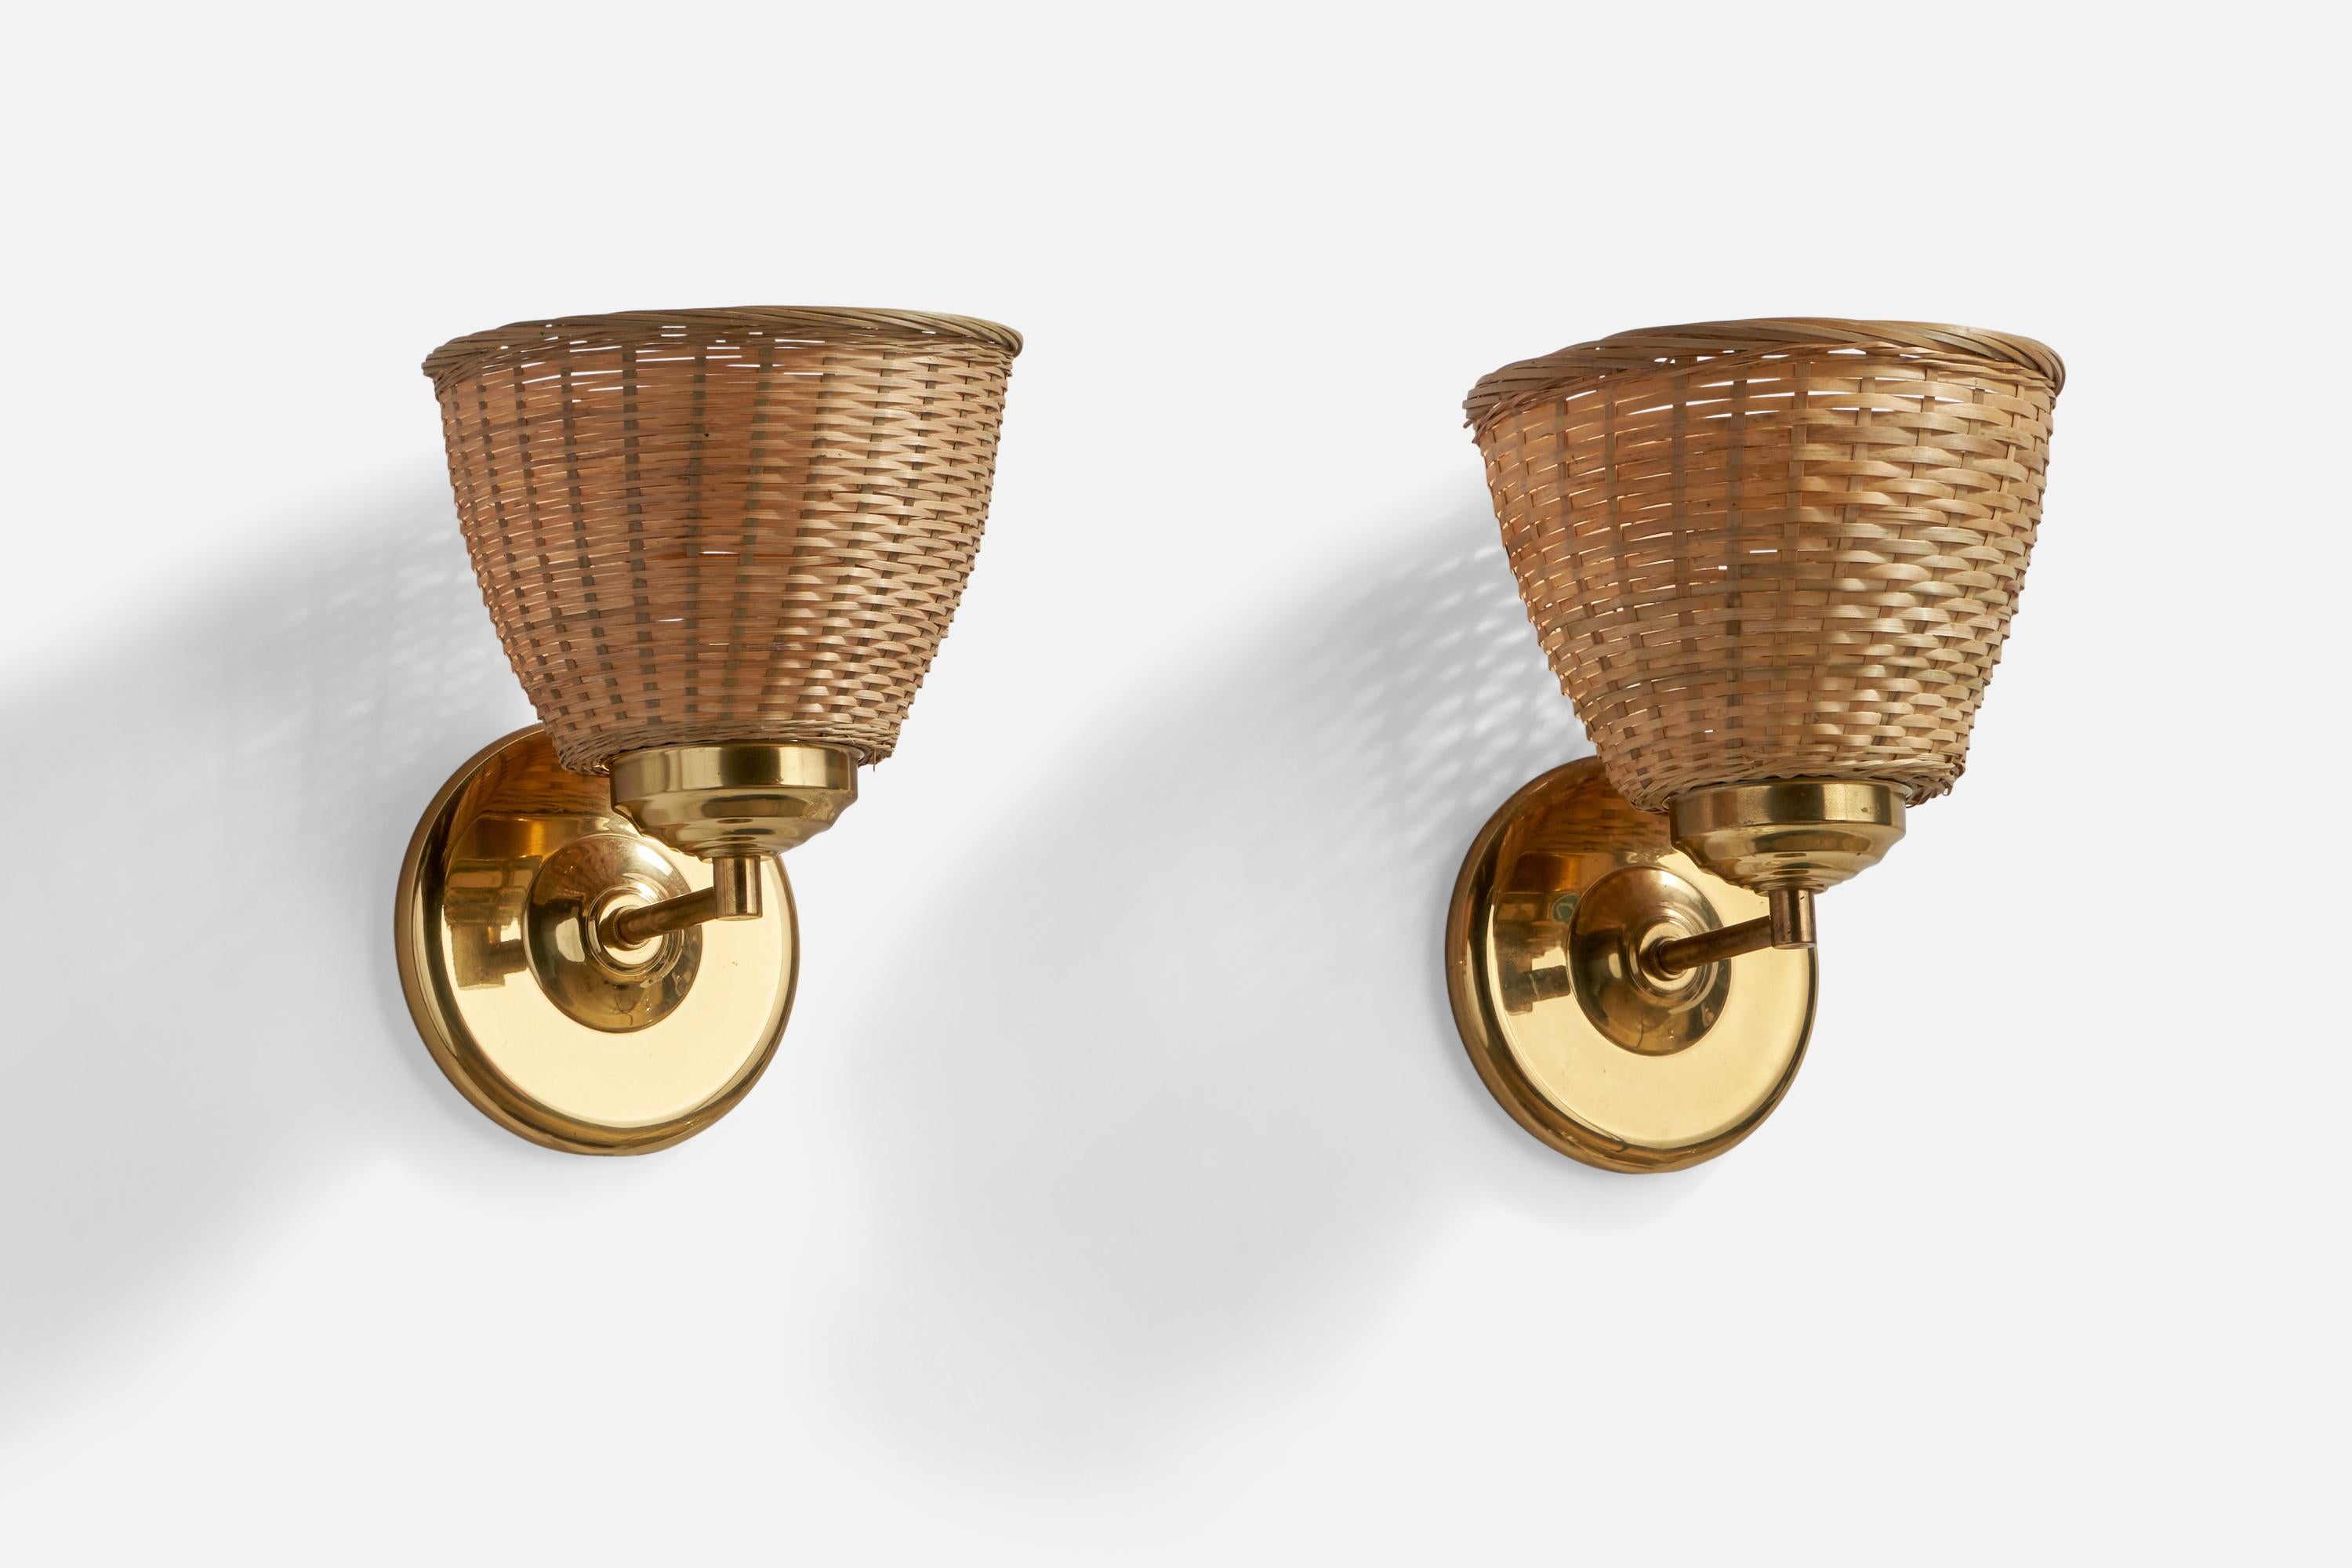 A pair of brass and rattan wall lights designed and produced in Sweden, c. 1960s.

Overall Dimensions (inches): 8.75” H x 7.15” W x 7” D
Back Plate Dimensions (inches): 5.05” Diameter x 0.8” Depth
Bulb Specifications: E-26 Bulbs
Number of Sockets: